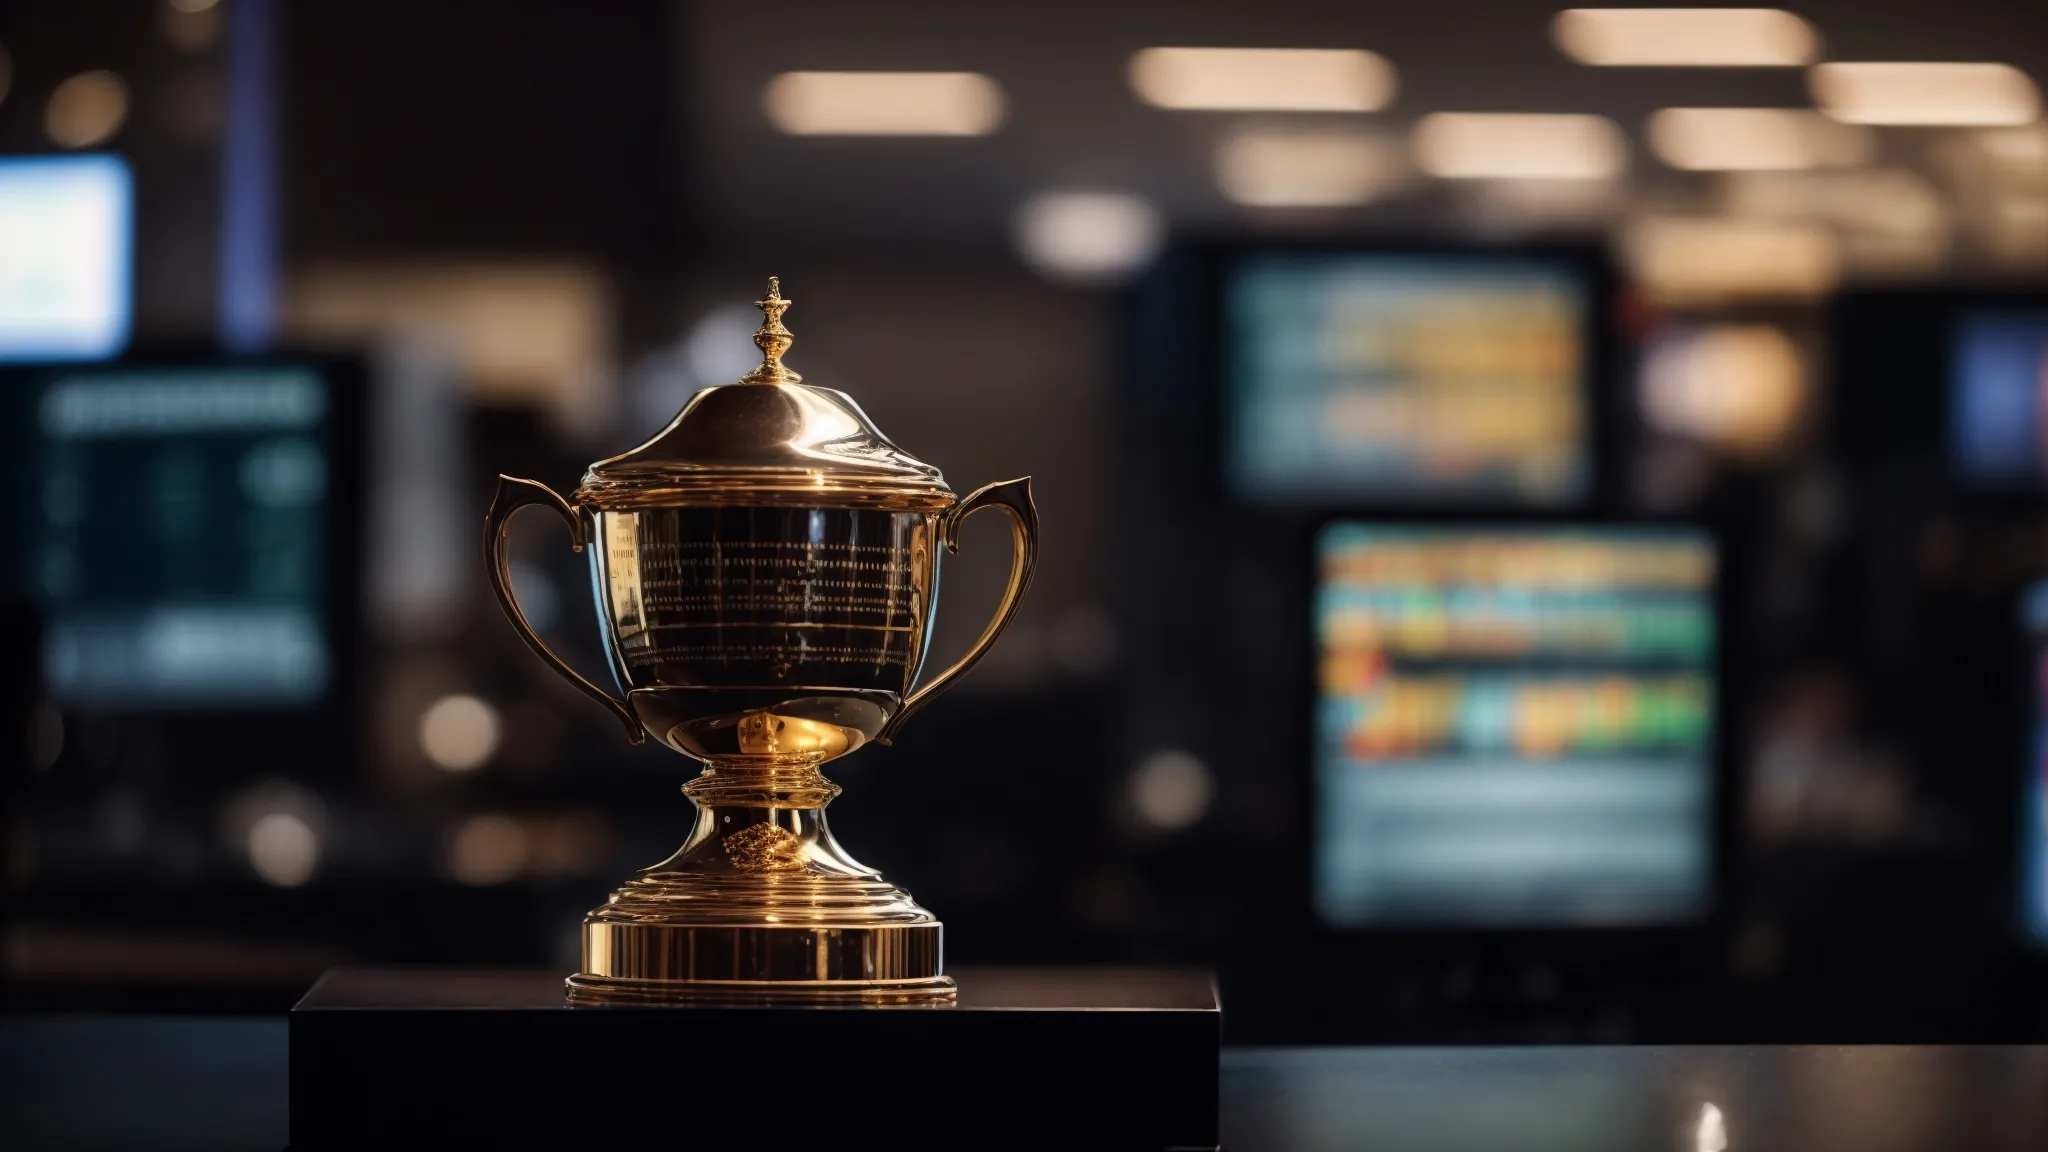 a trophy gleaming atop a pedestal against a blurred background of computer screens showcasing graphs and analytics.